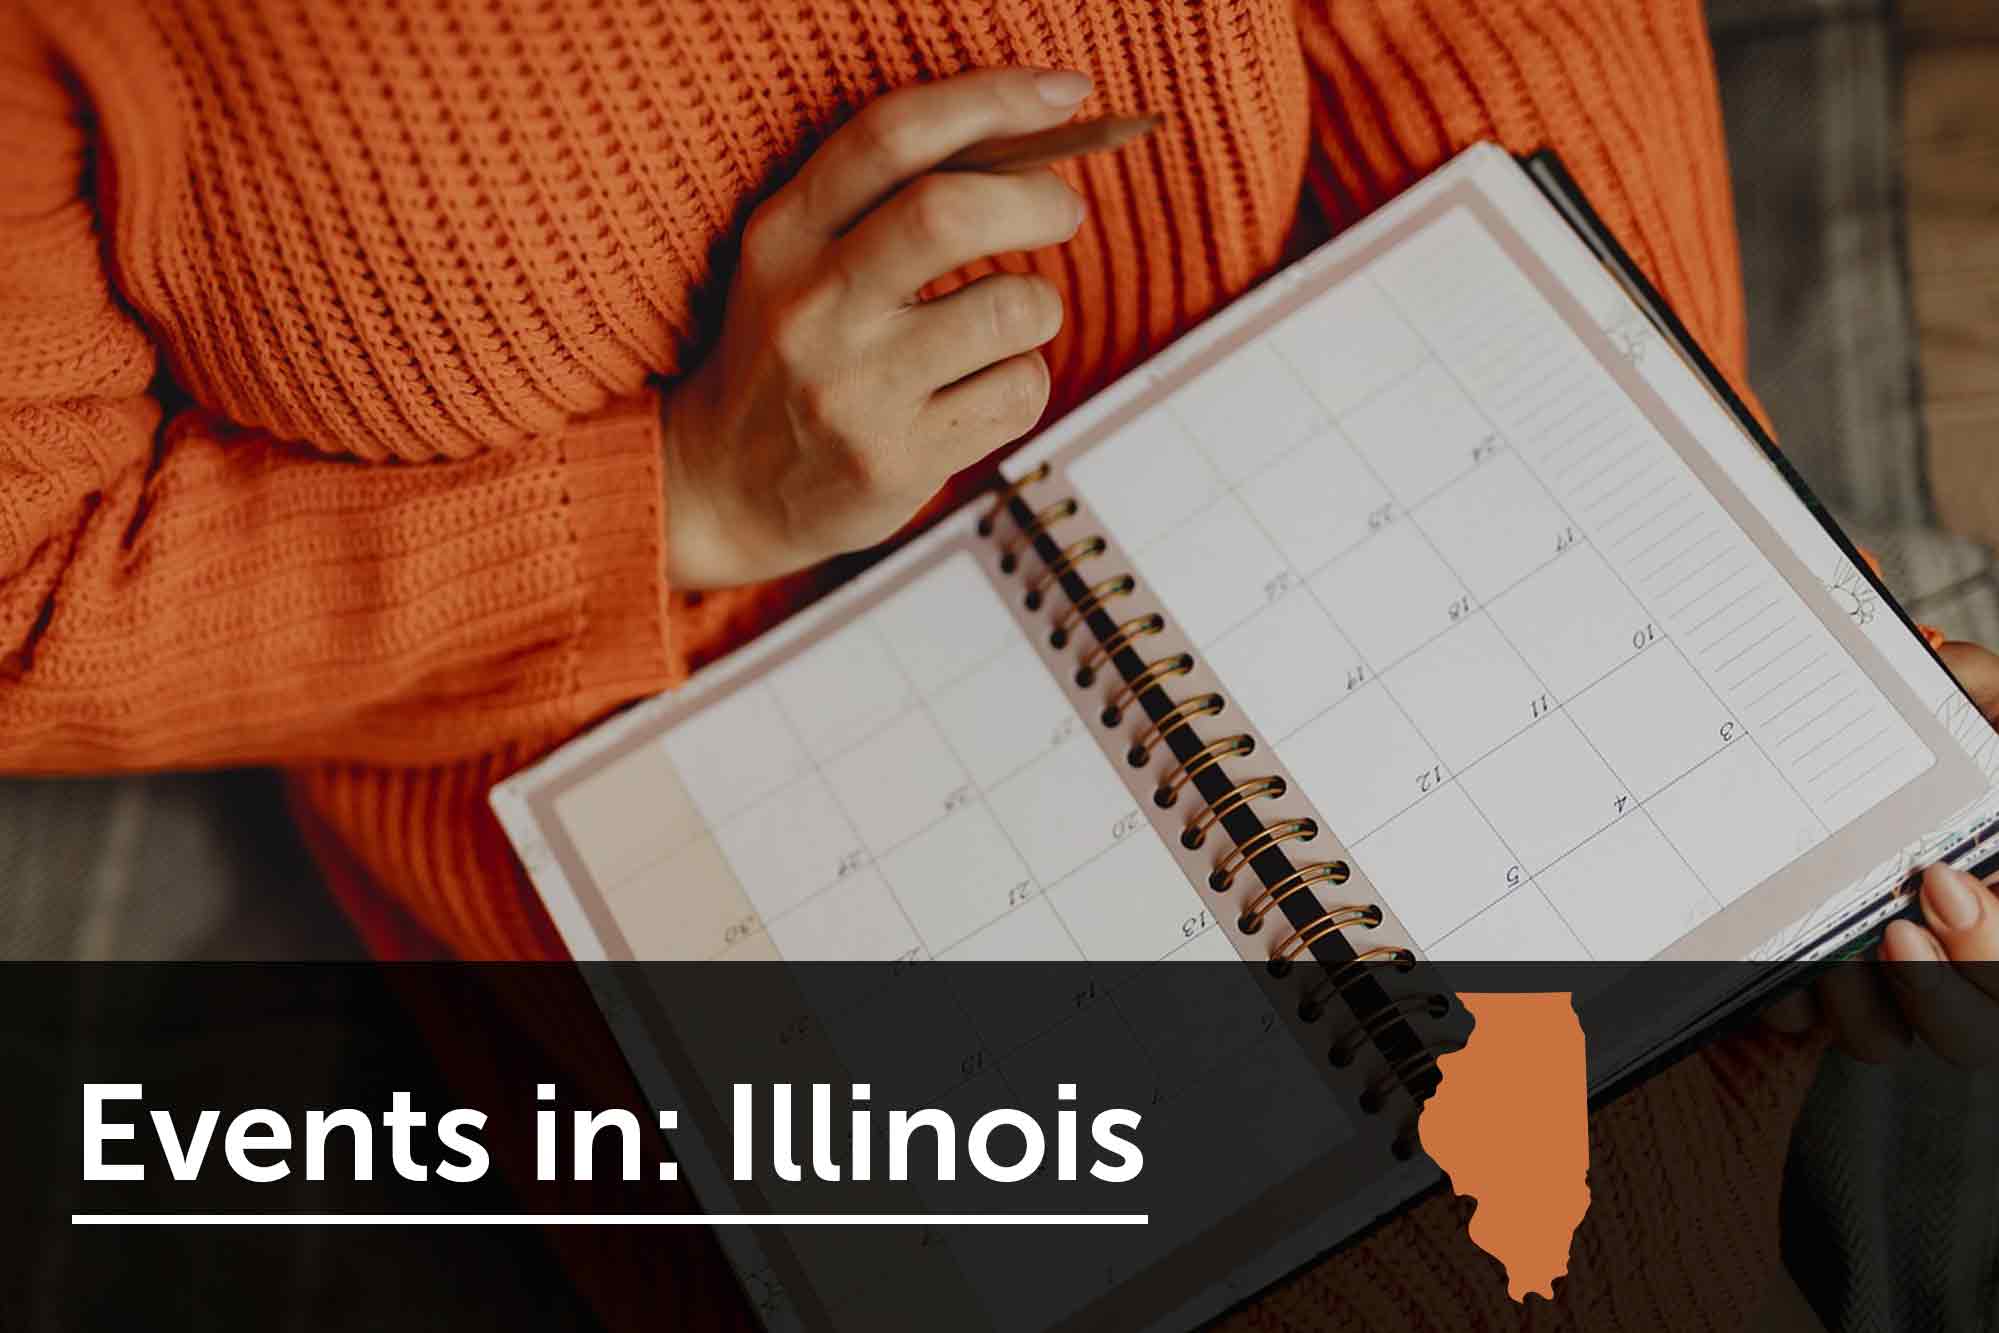 Women's business events in Illinois